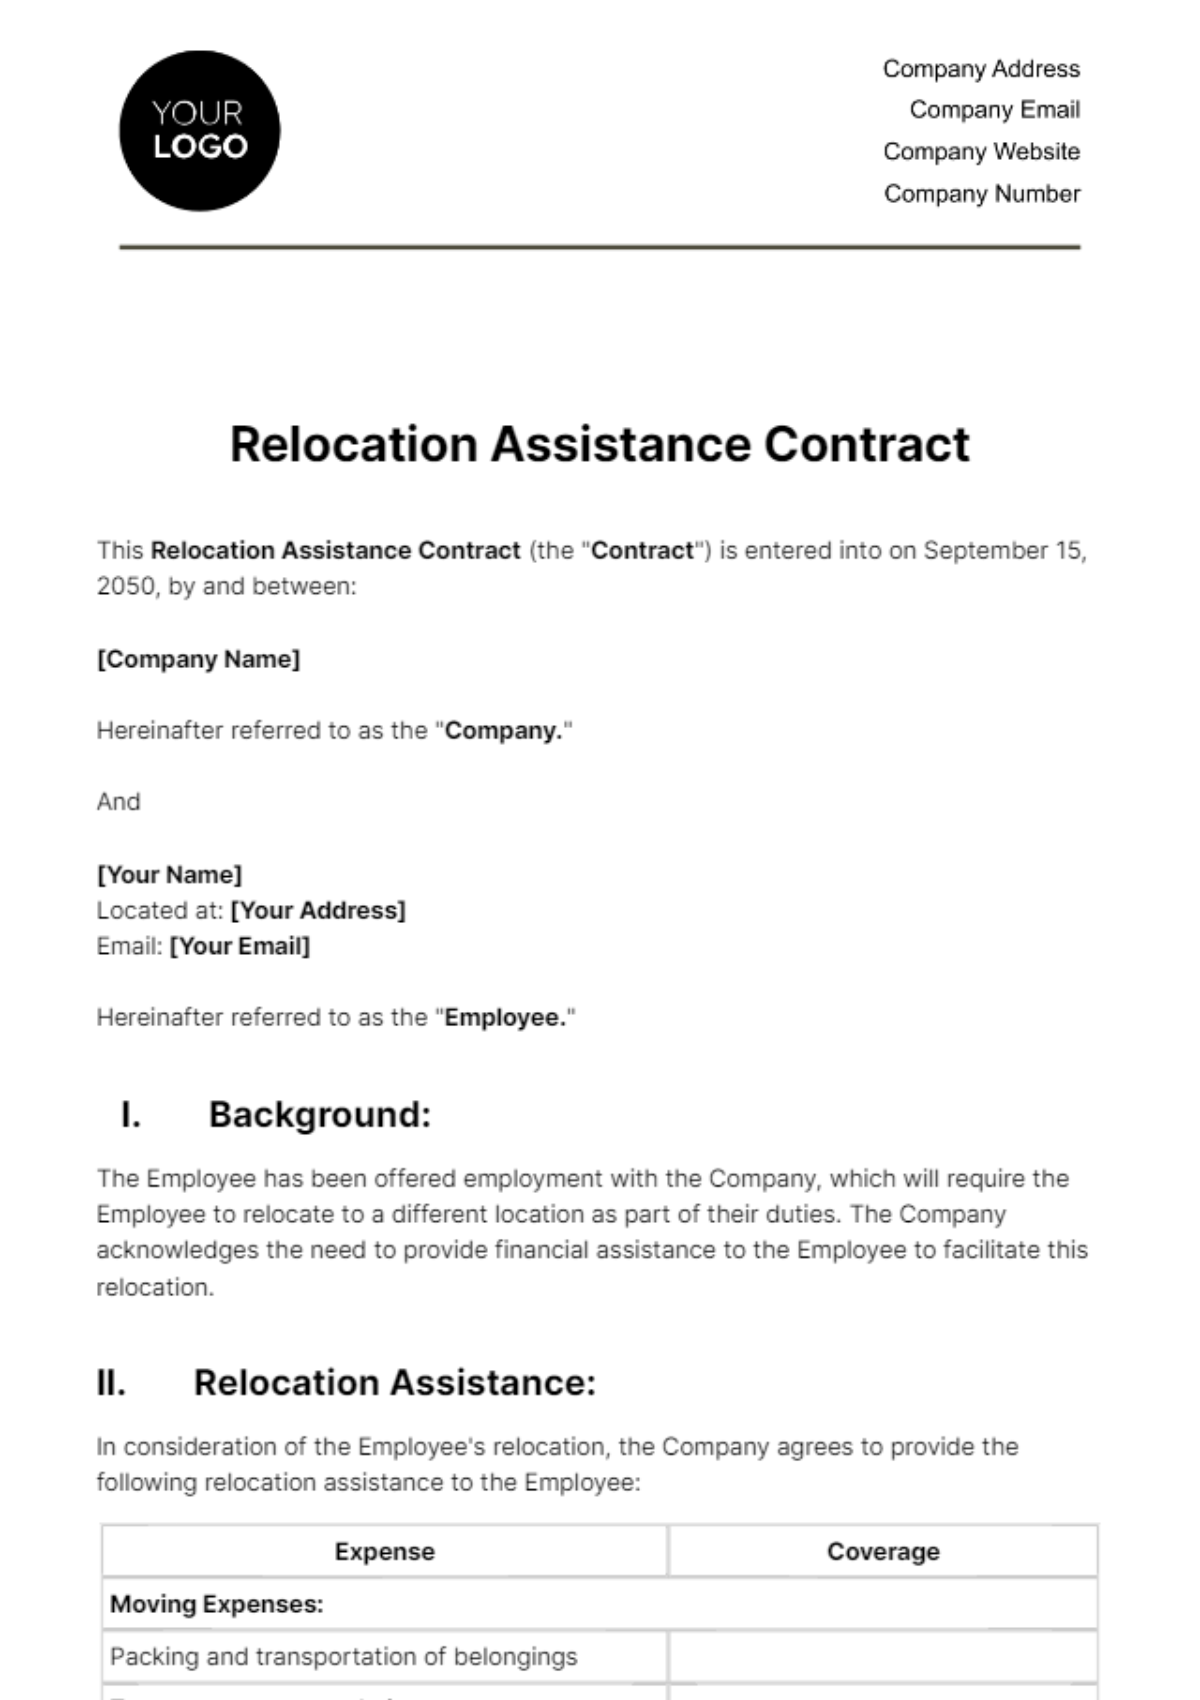 Free Relocation Assistance Contract HR Template